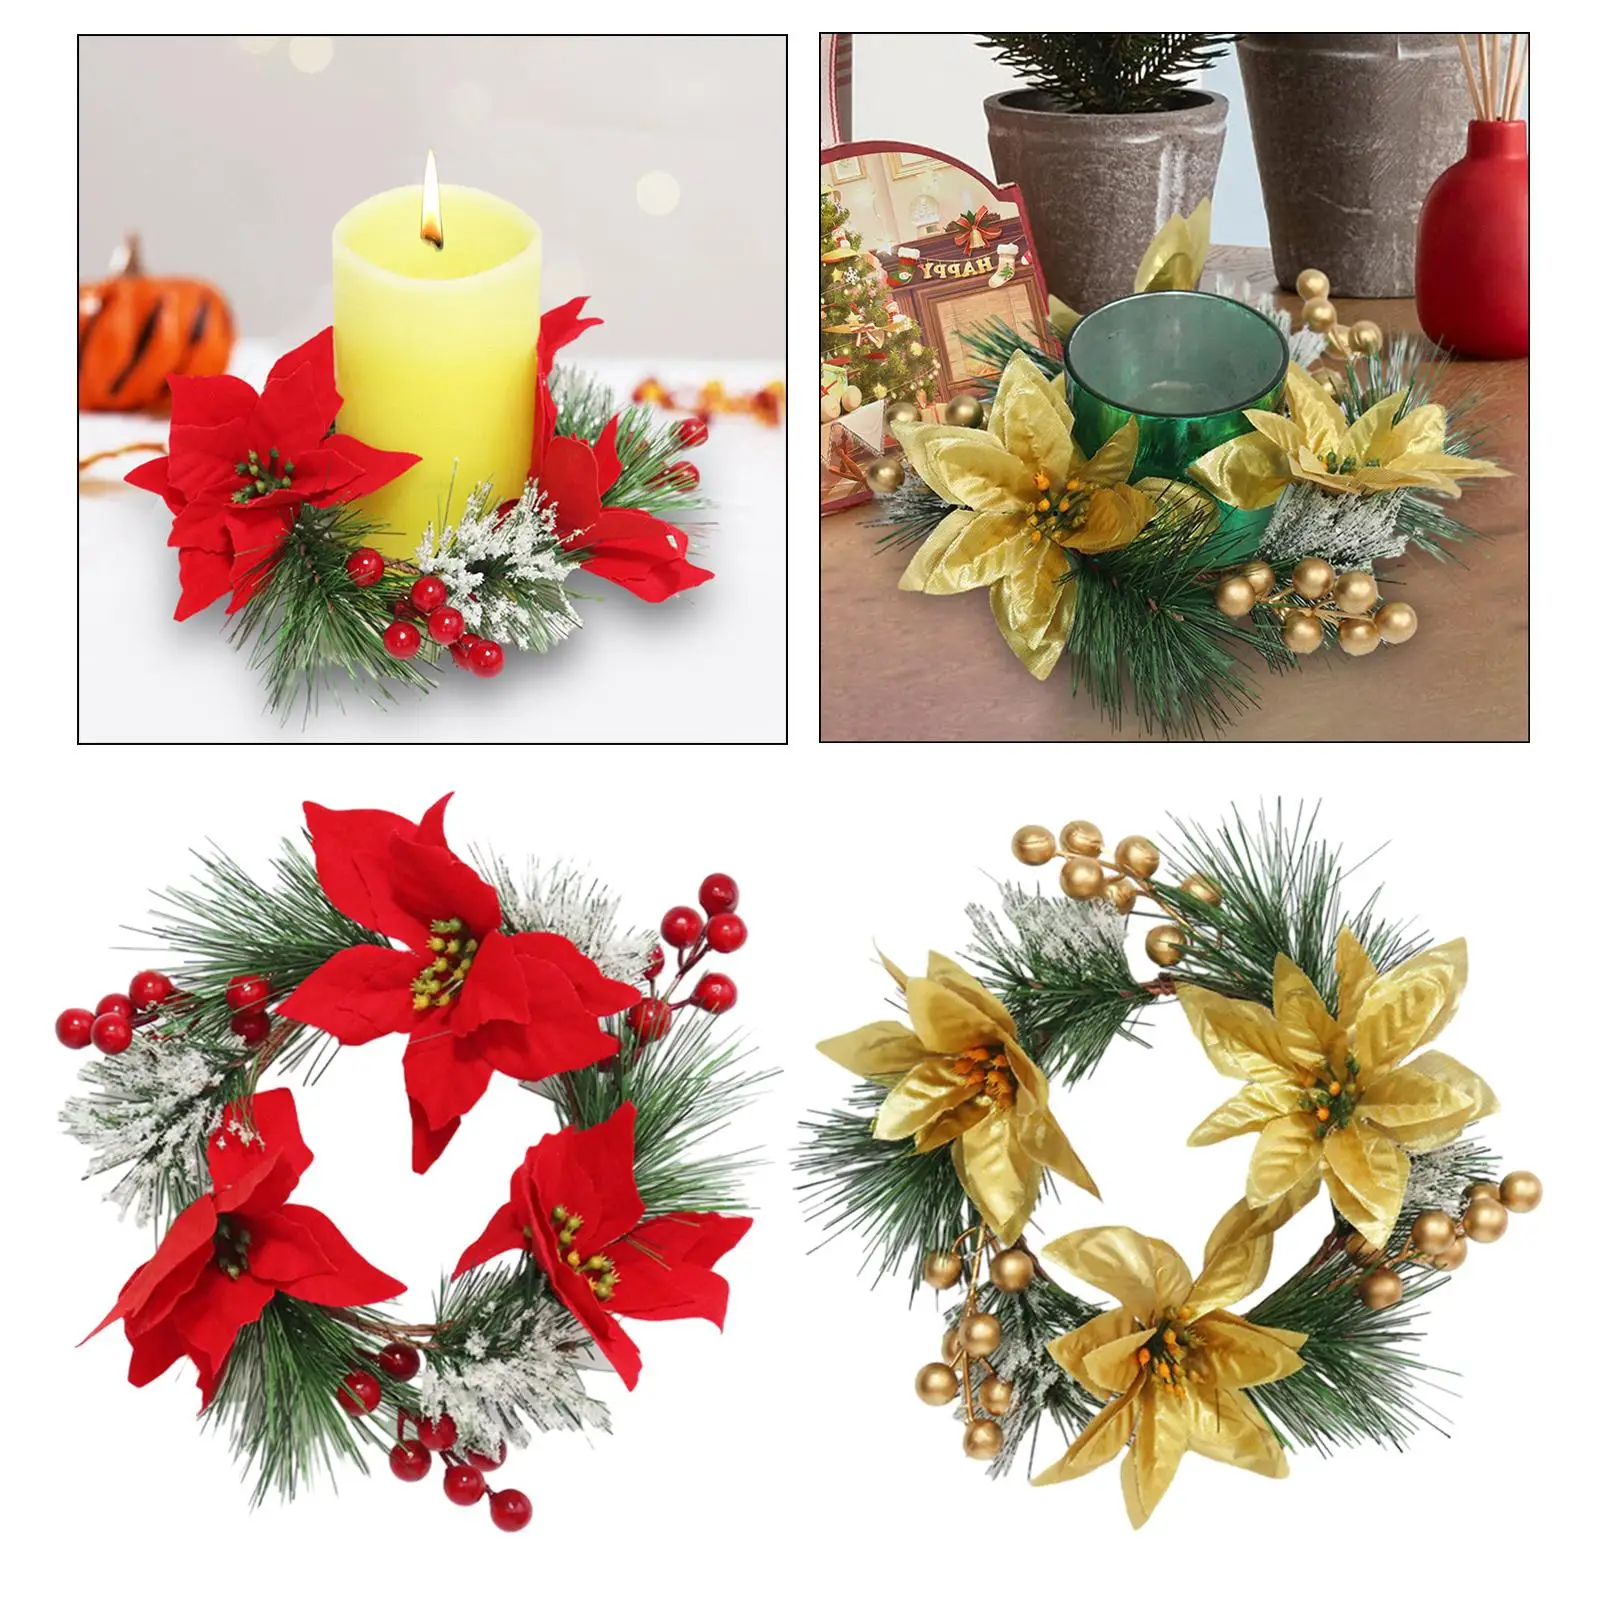 Christmas Candle Rings Candle Holder Rings Decorative Greenery Leaves Mini Wreaths for Dining Room Xmas Party Holiday Farmhouse